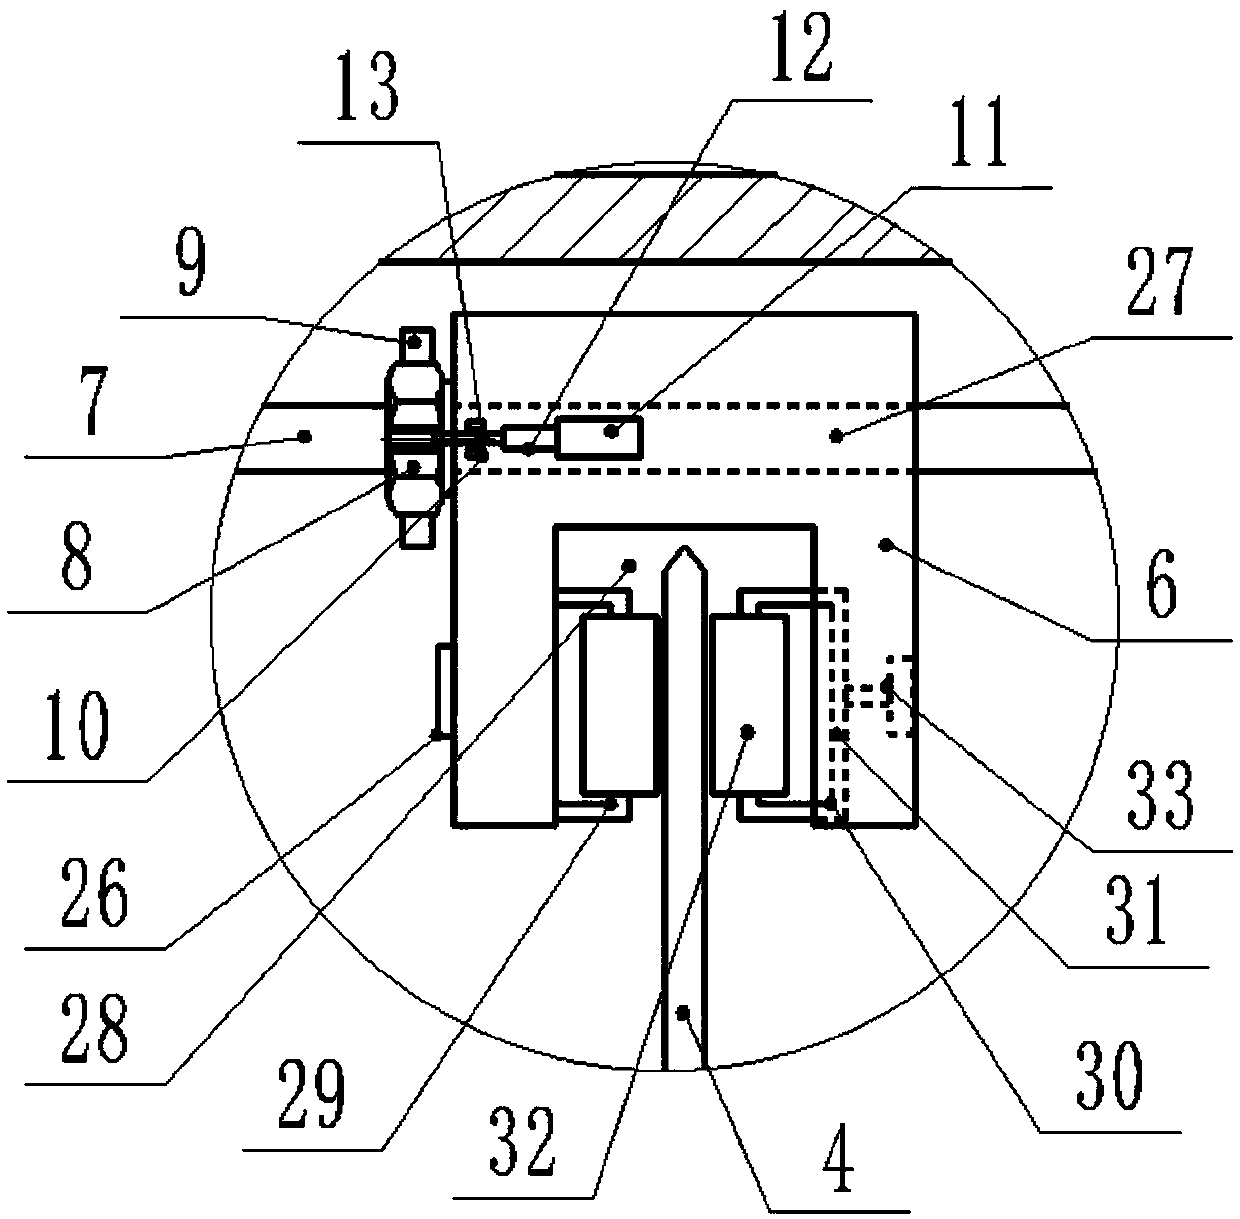 A manual adjustment system for arbitrary spacing of saw blades for cutting plates of different thicknesses